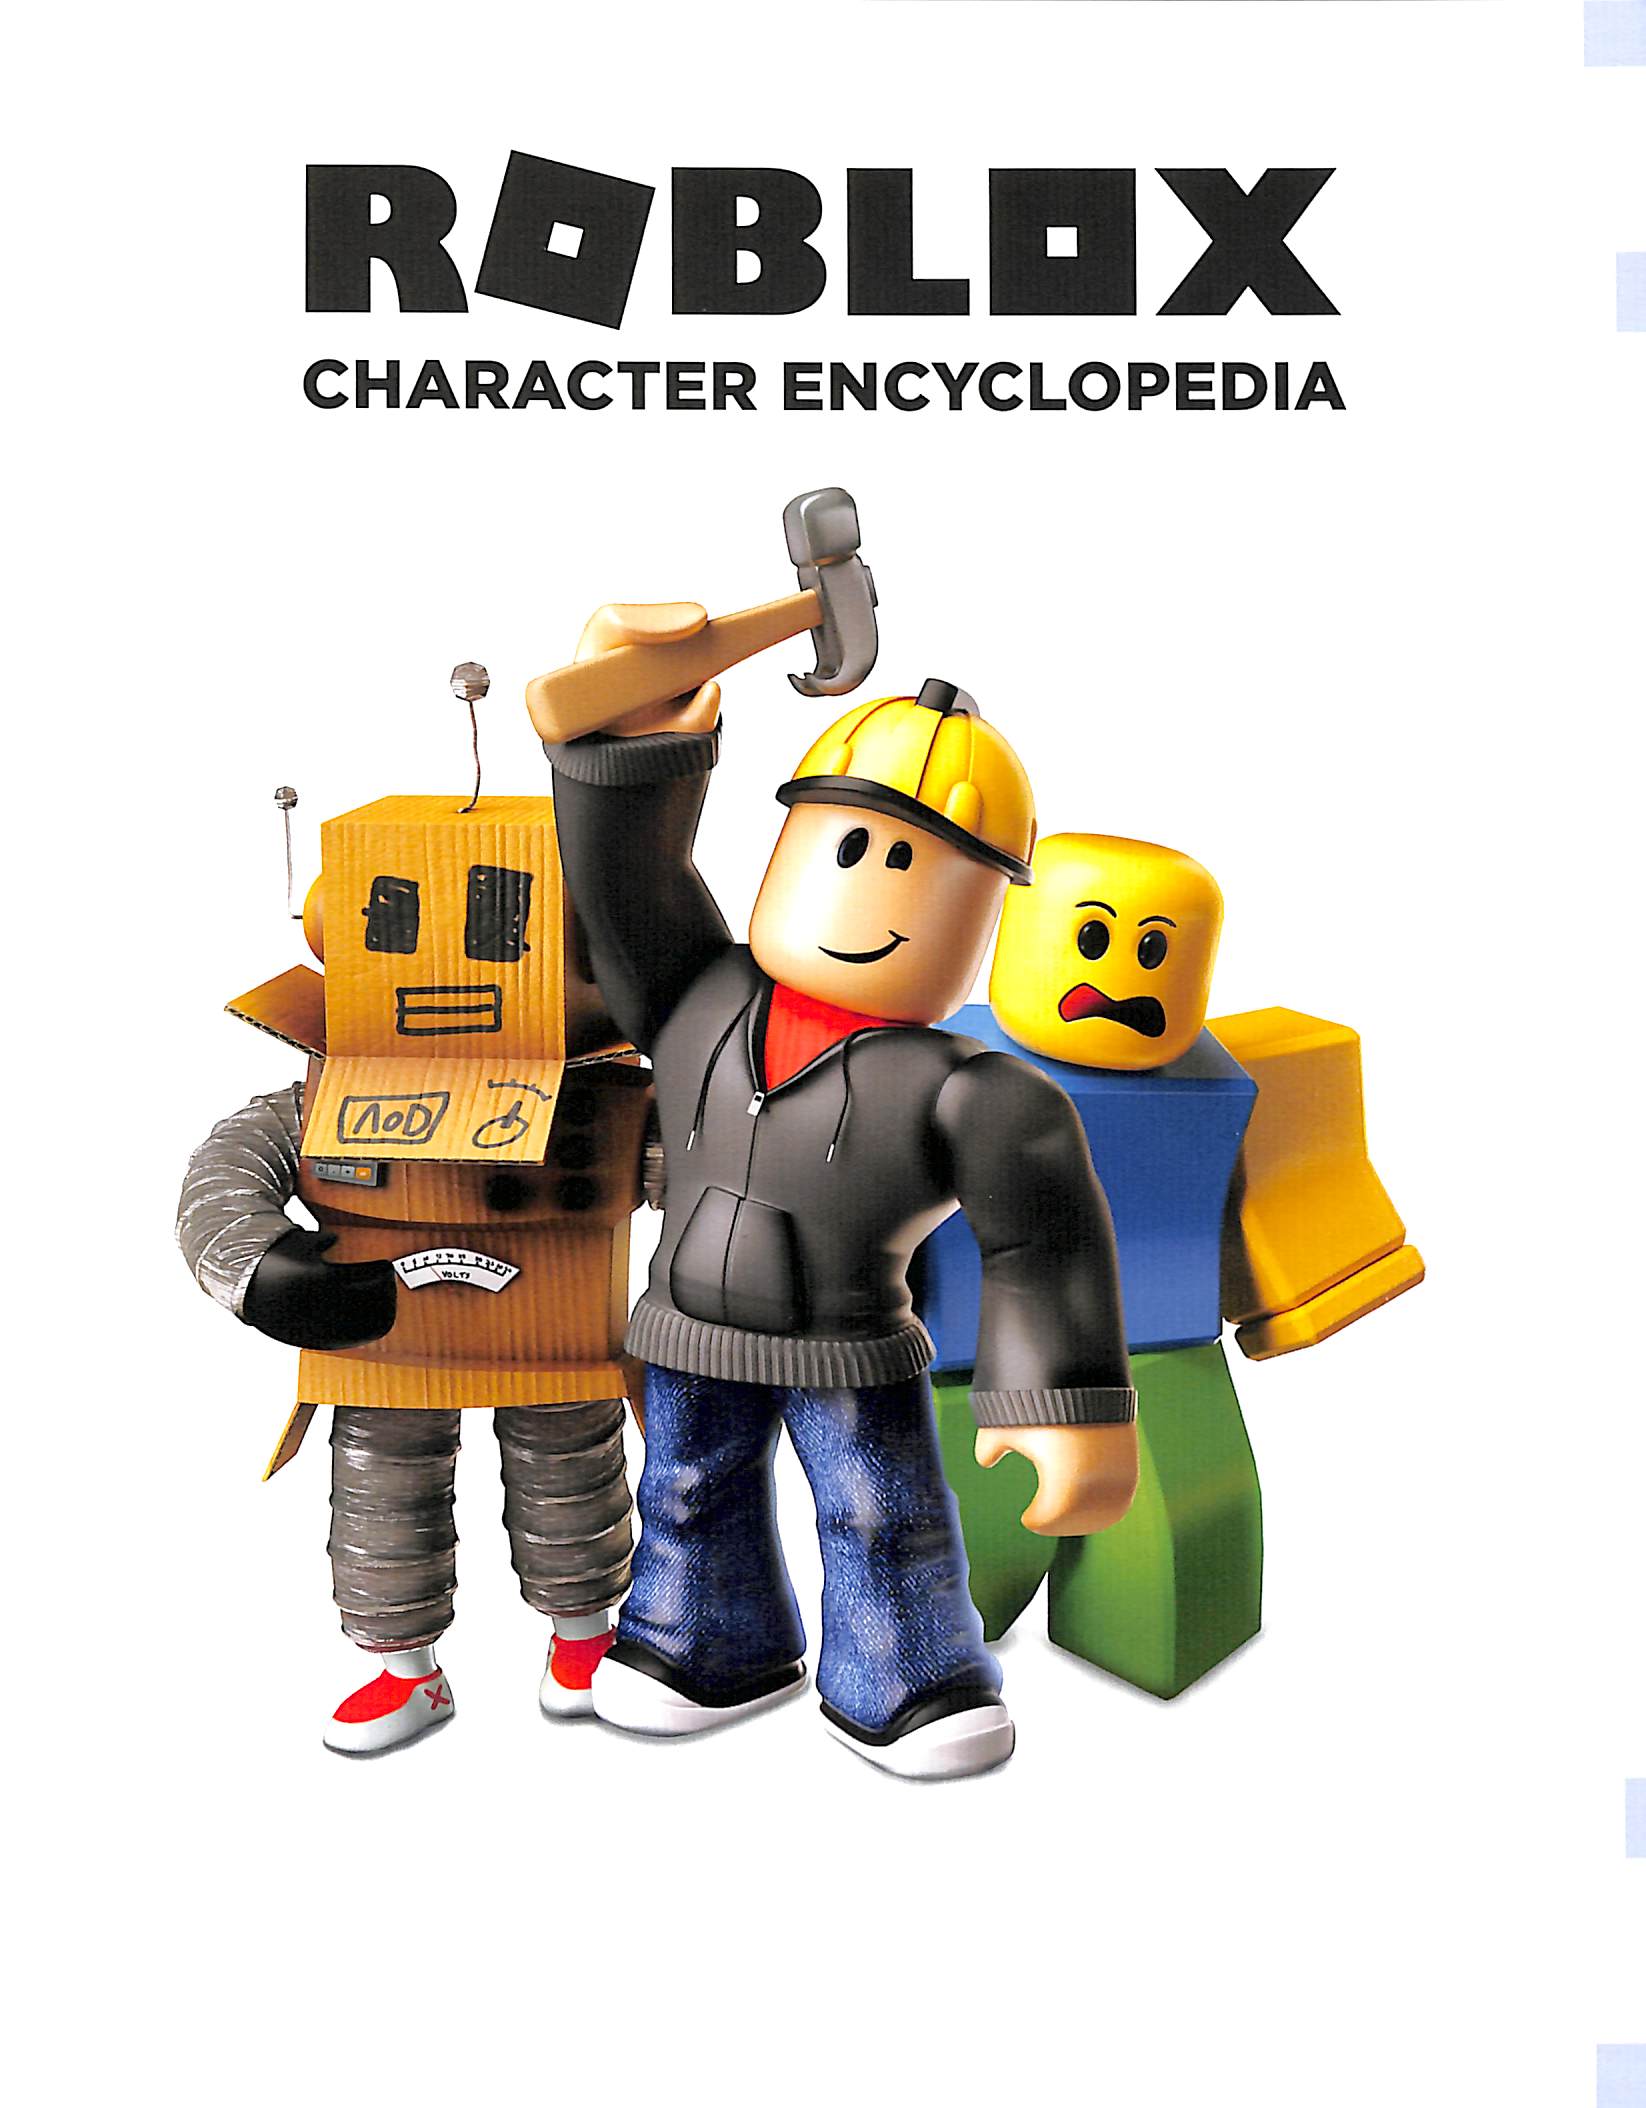 Farshore Books - Meet the many characters of Roblox! Every Roblox Character  Encyclopedia comes with over a hundred fact files on your favourite  rs, developers and in-game characters, plus an EXCLUSIVE Outrageous